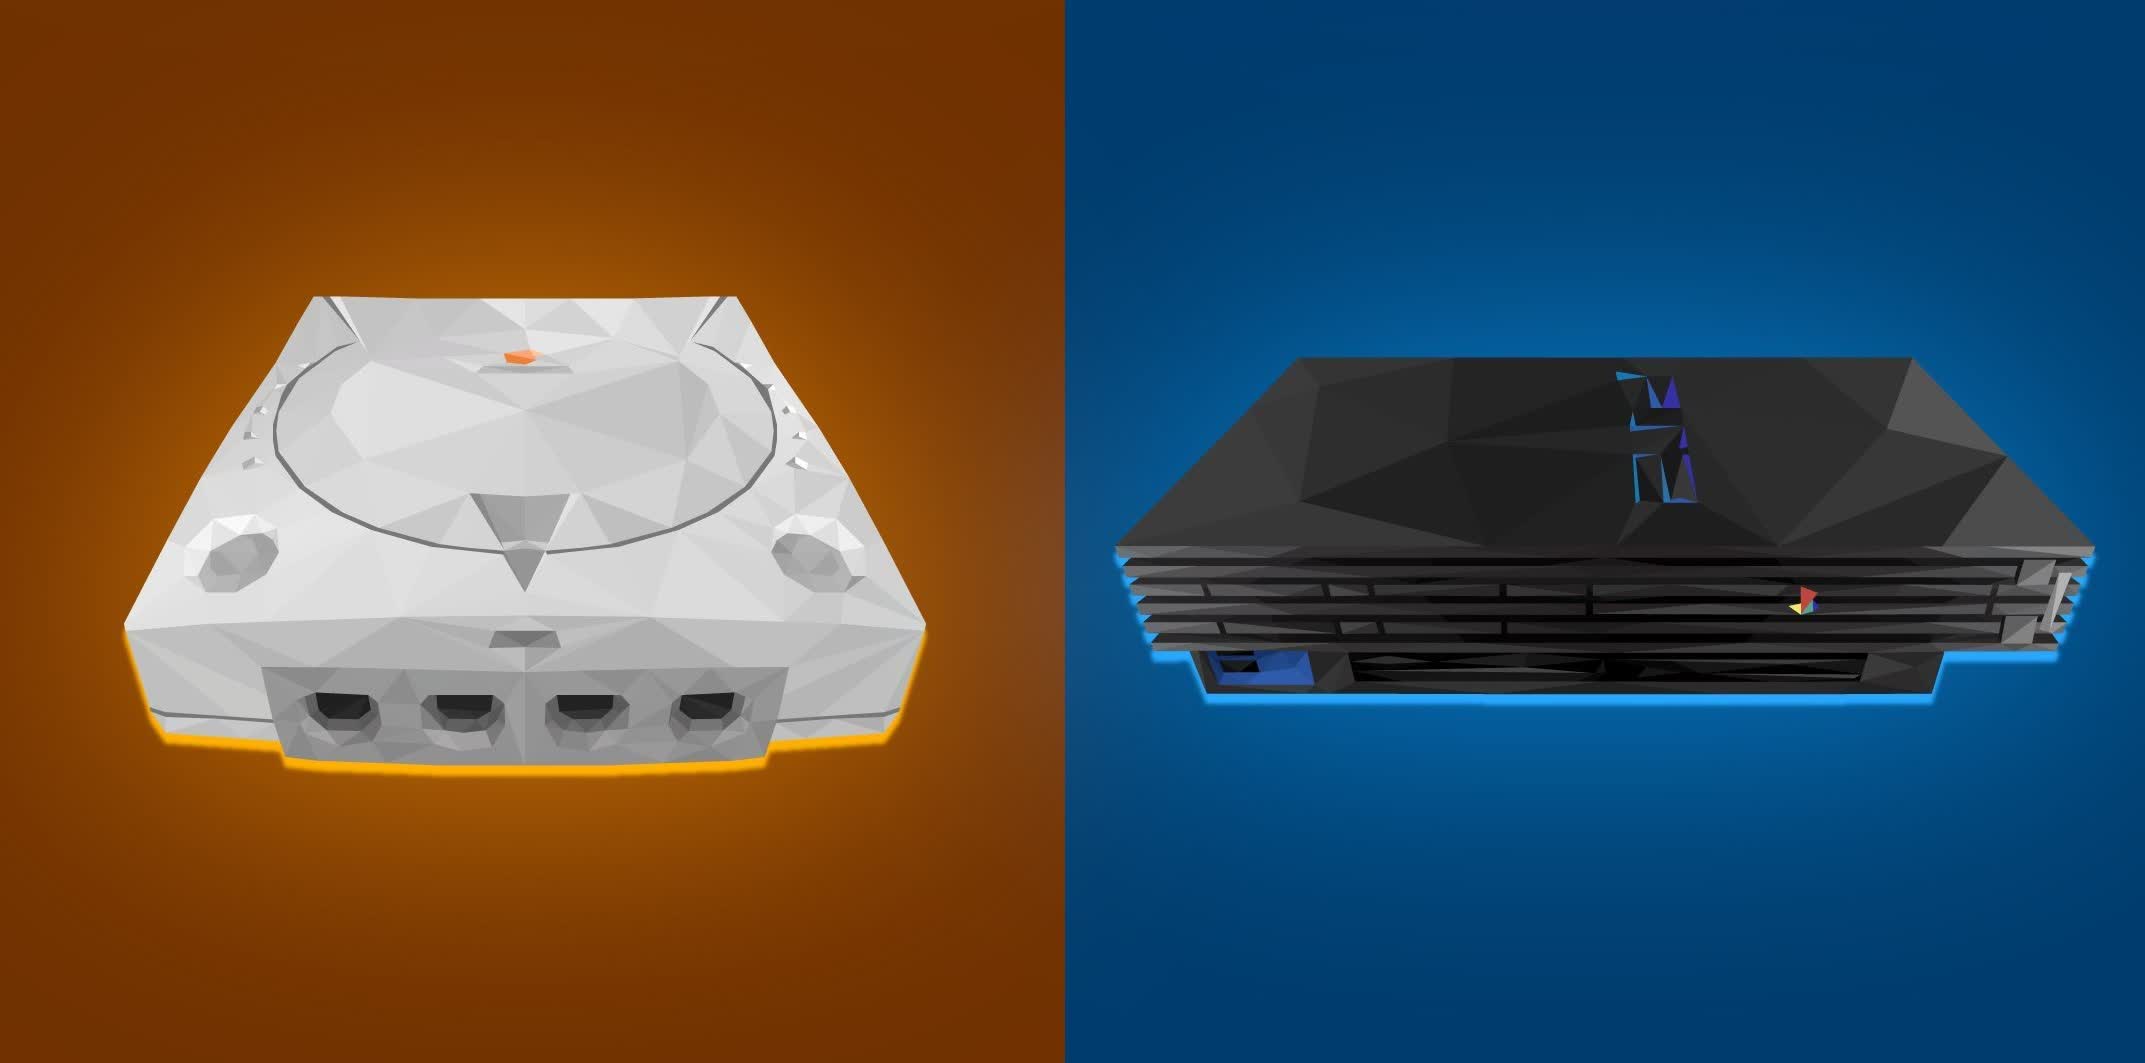 Xbox celebrates one of gaming's best eras with a nod to the PS2, GameCube, and Dreamcast